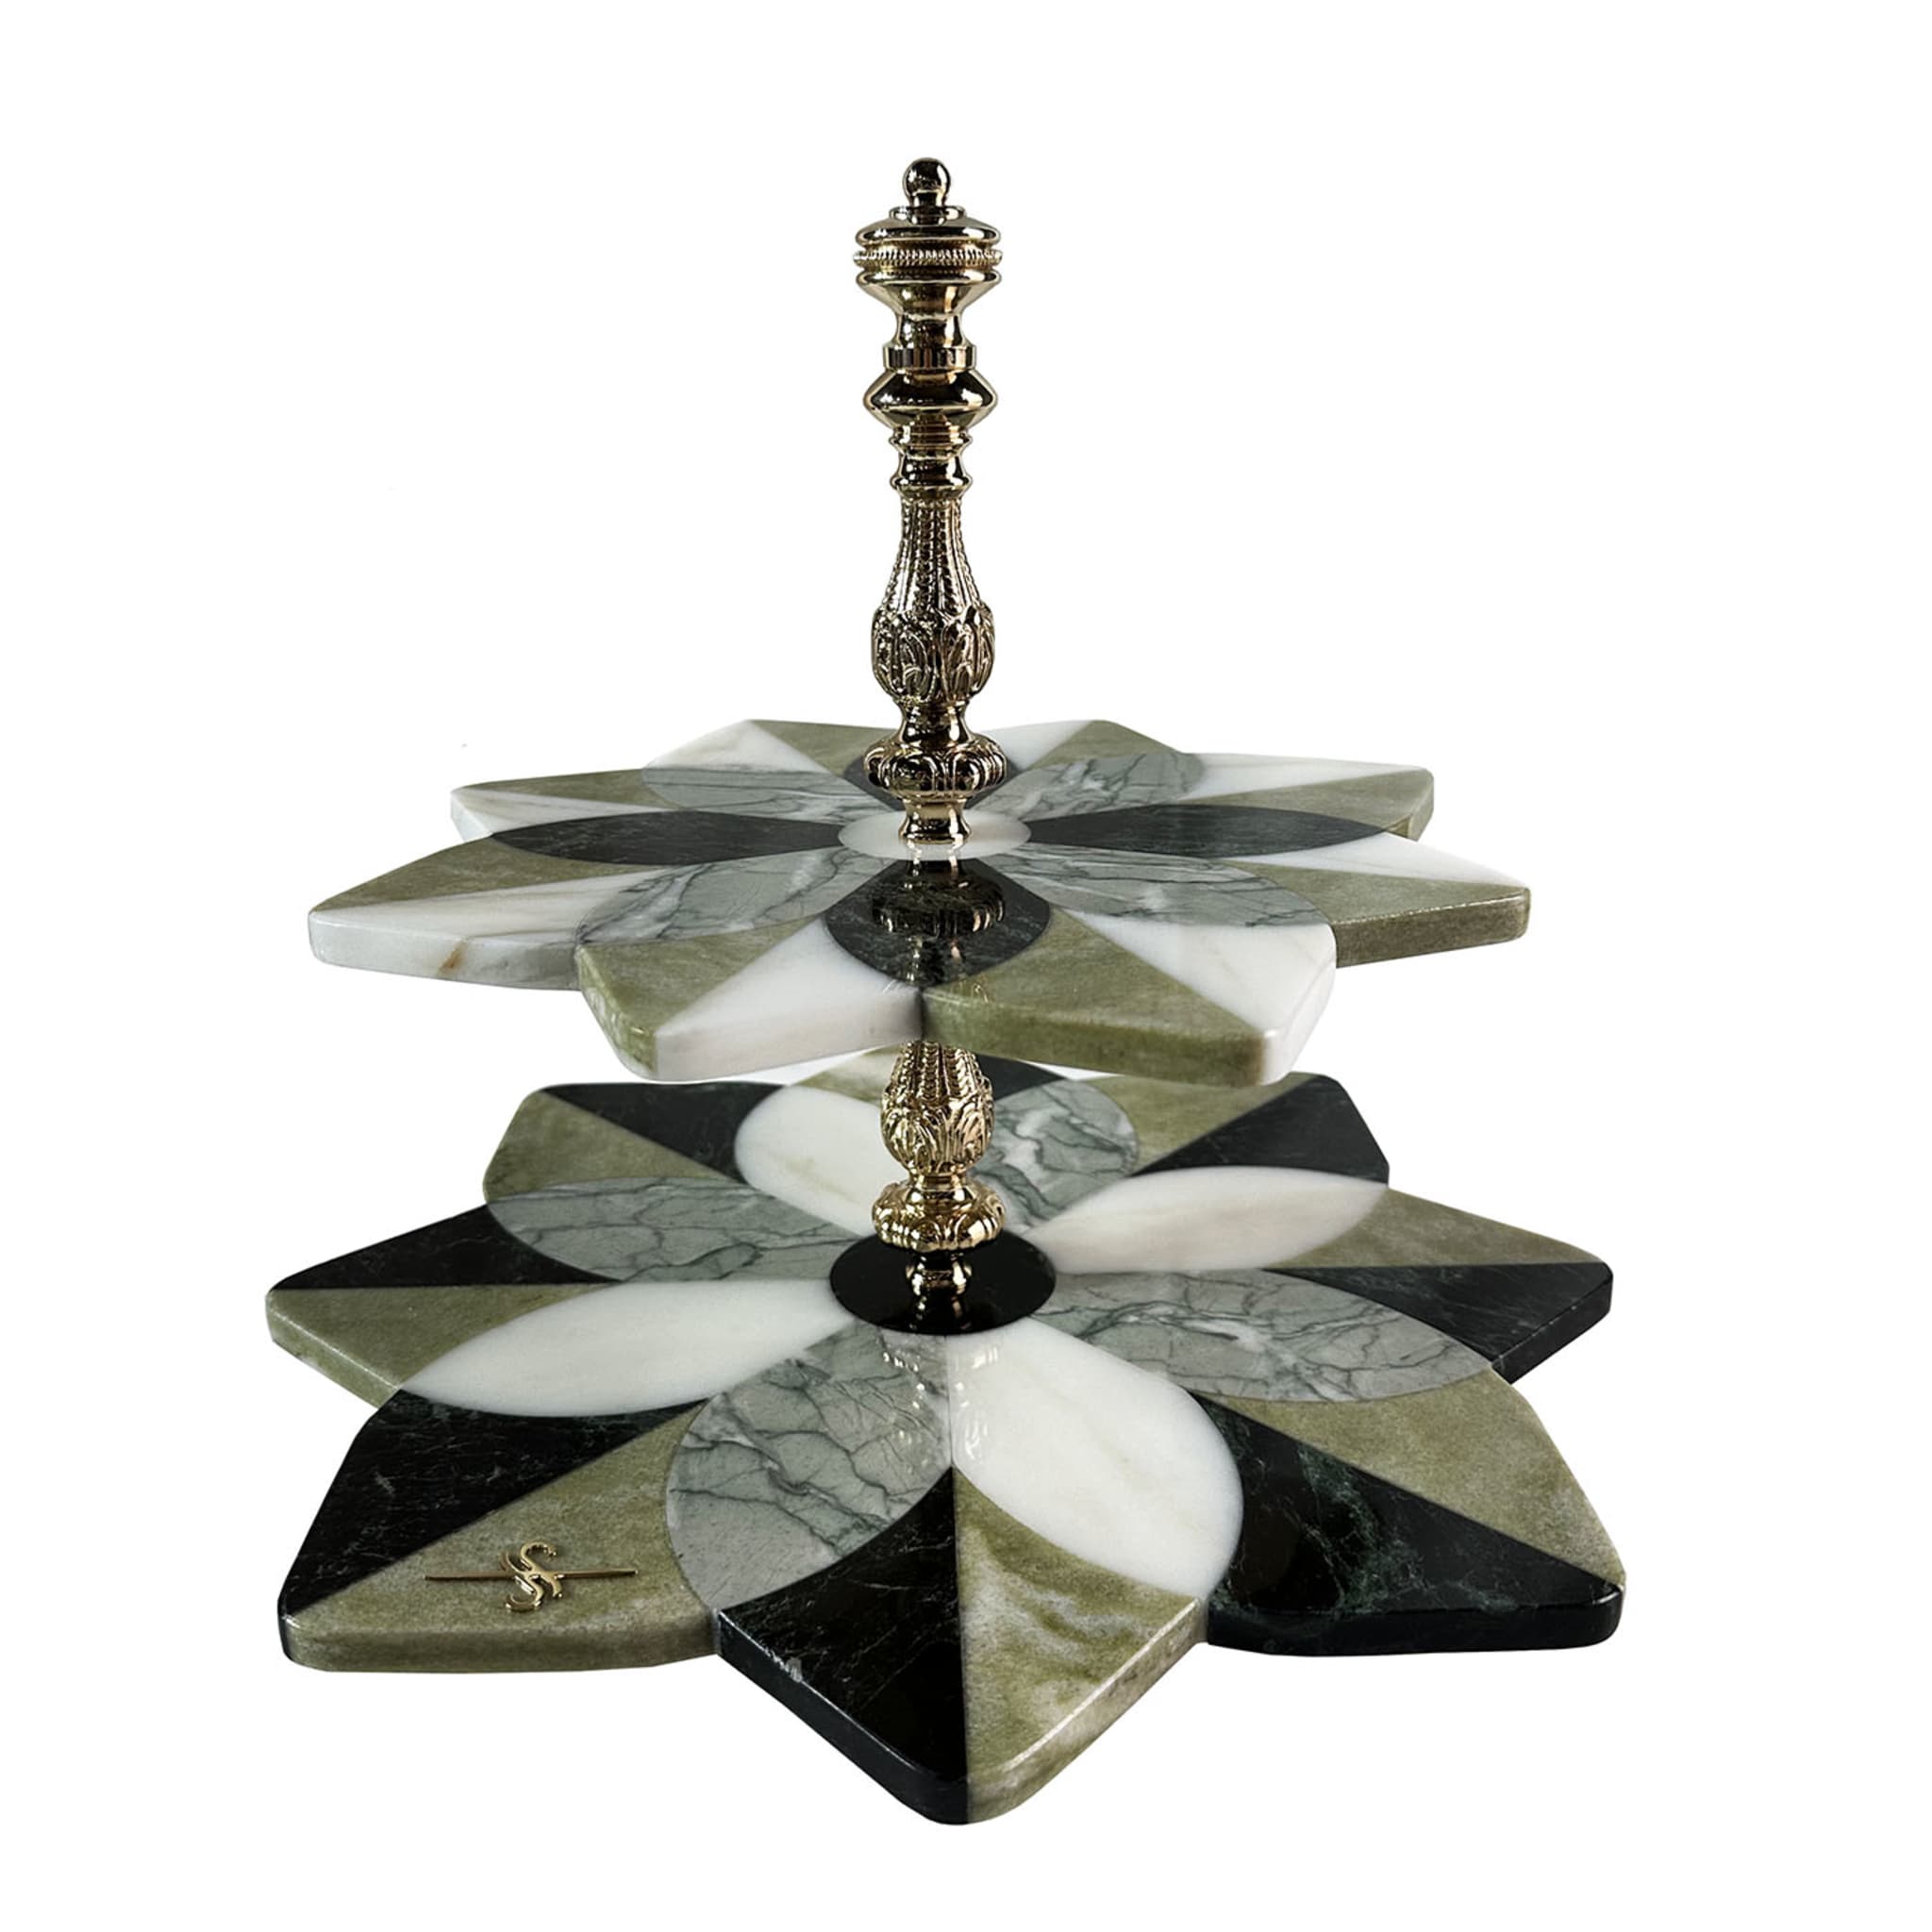 Two-tier Stand in Marble & 24K Gold - Alternative view 1